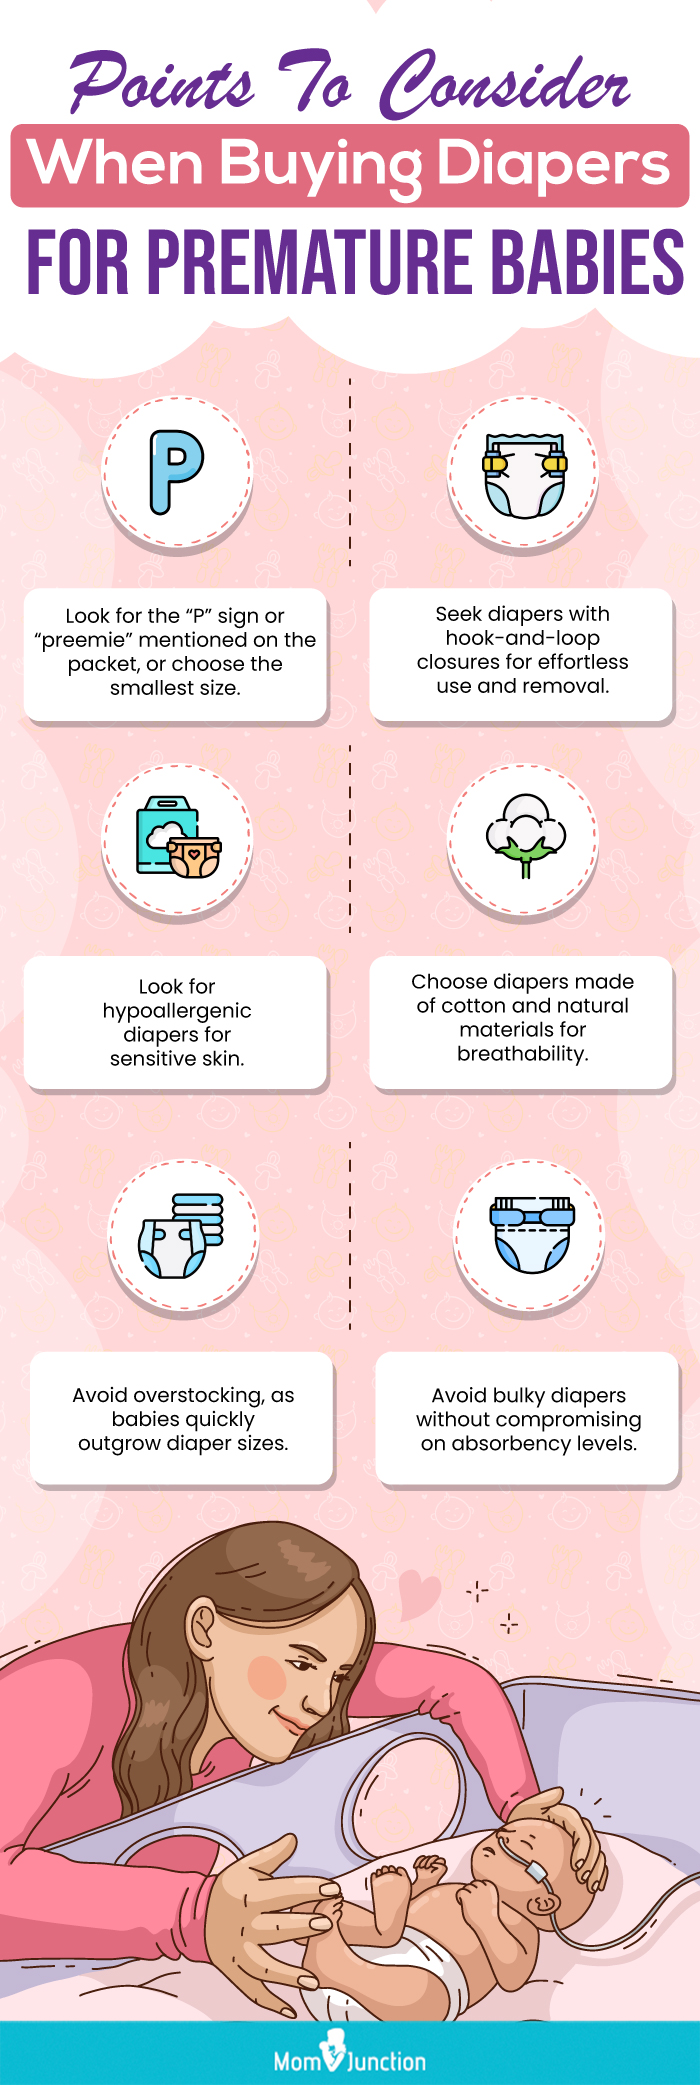 Points To Consider When Buying Diapers For Premature Babies (infographic)